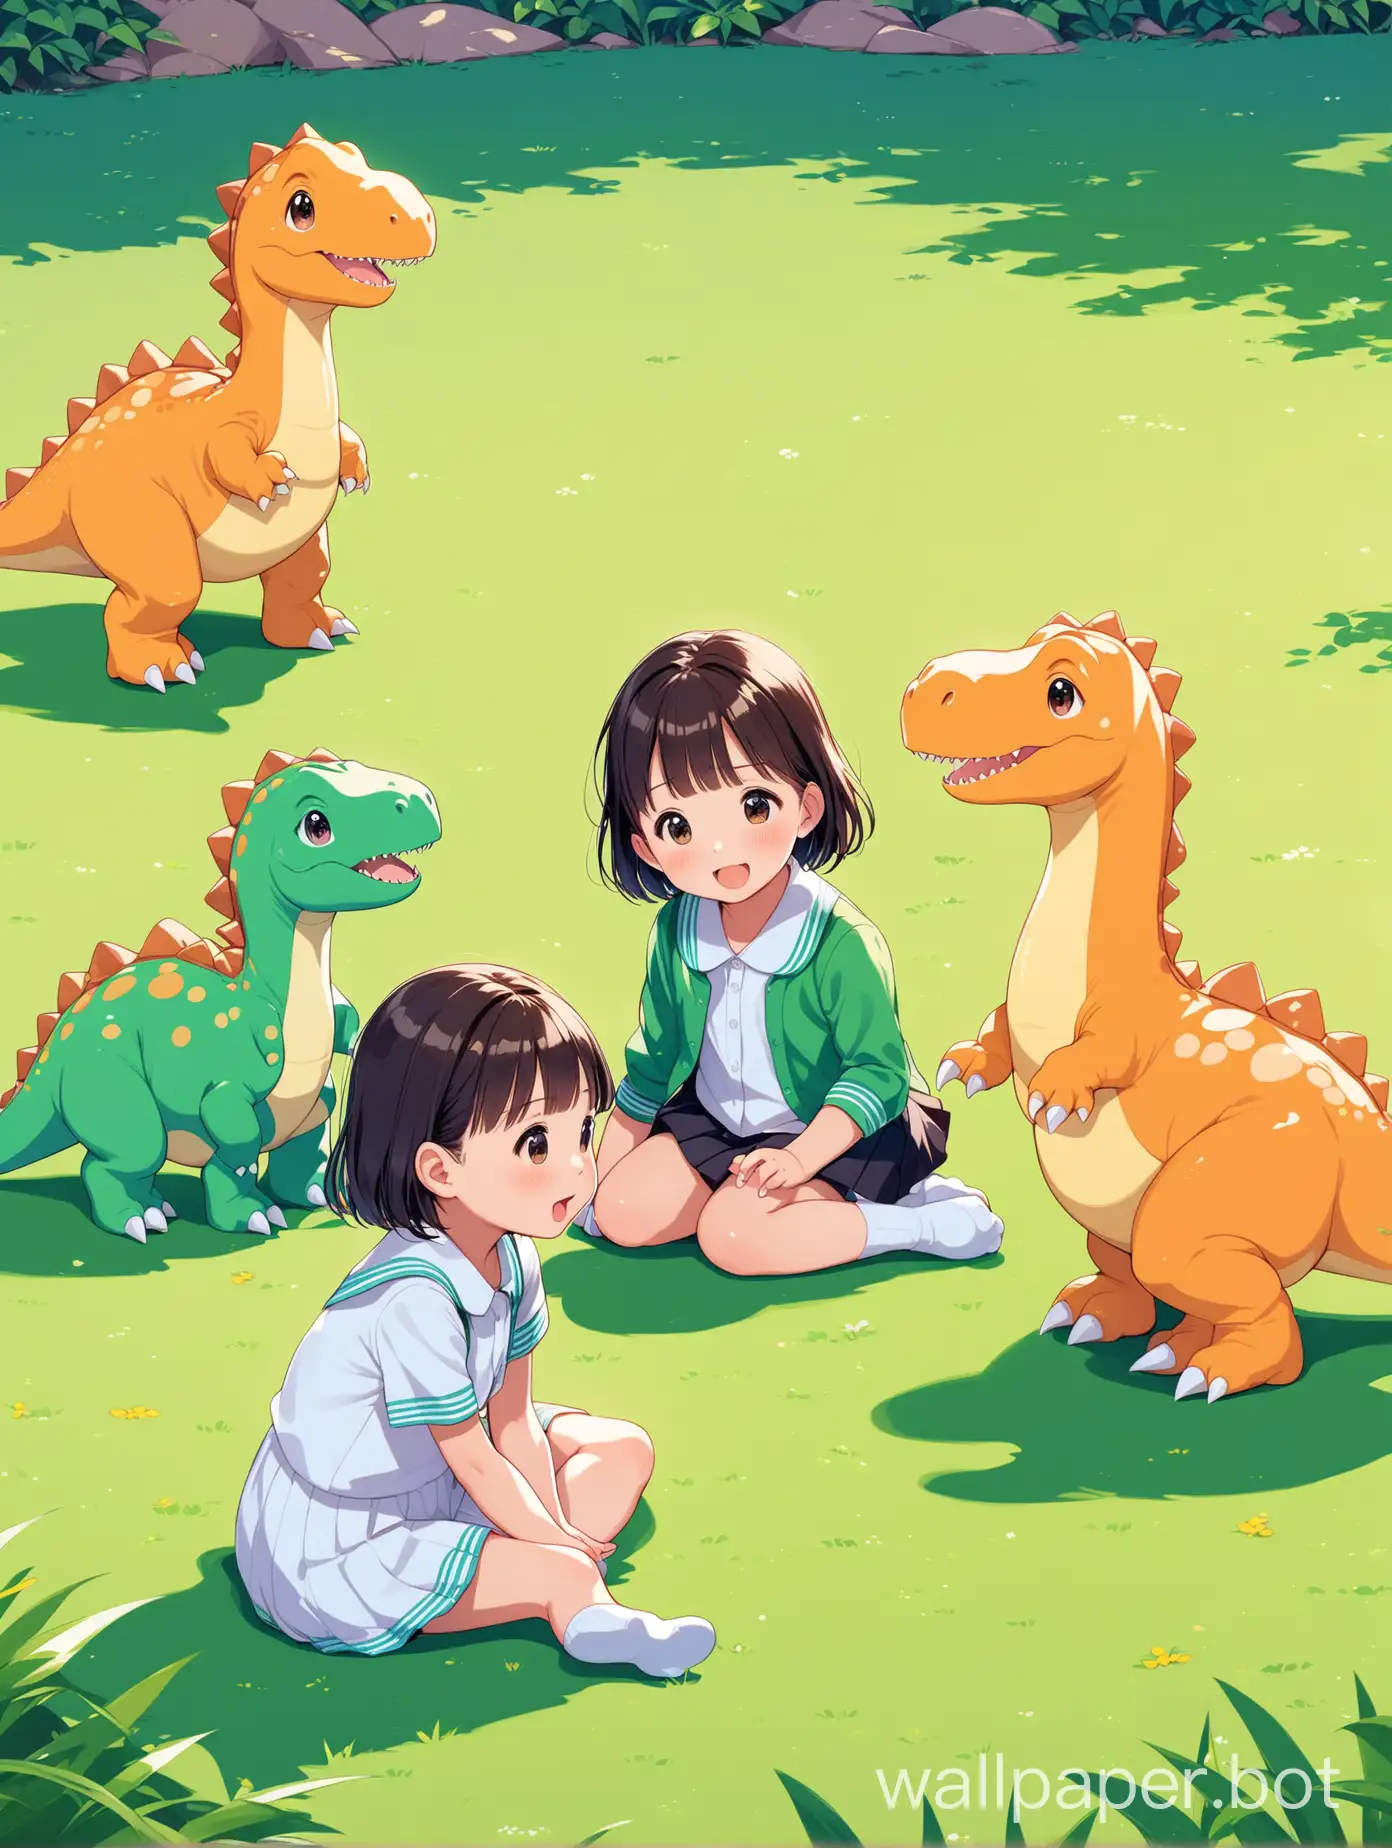 Adorable-Schoolchildren-Chatting-with-Baby-Dinosaurs-on-Green-Grass